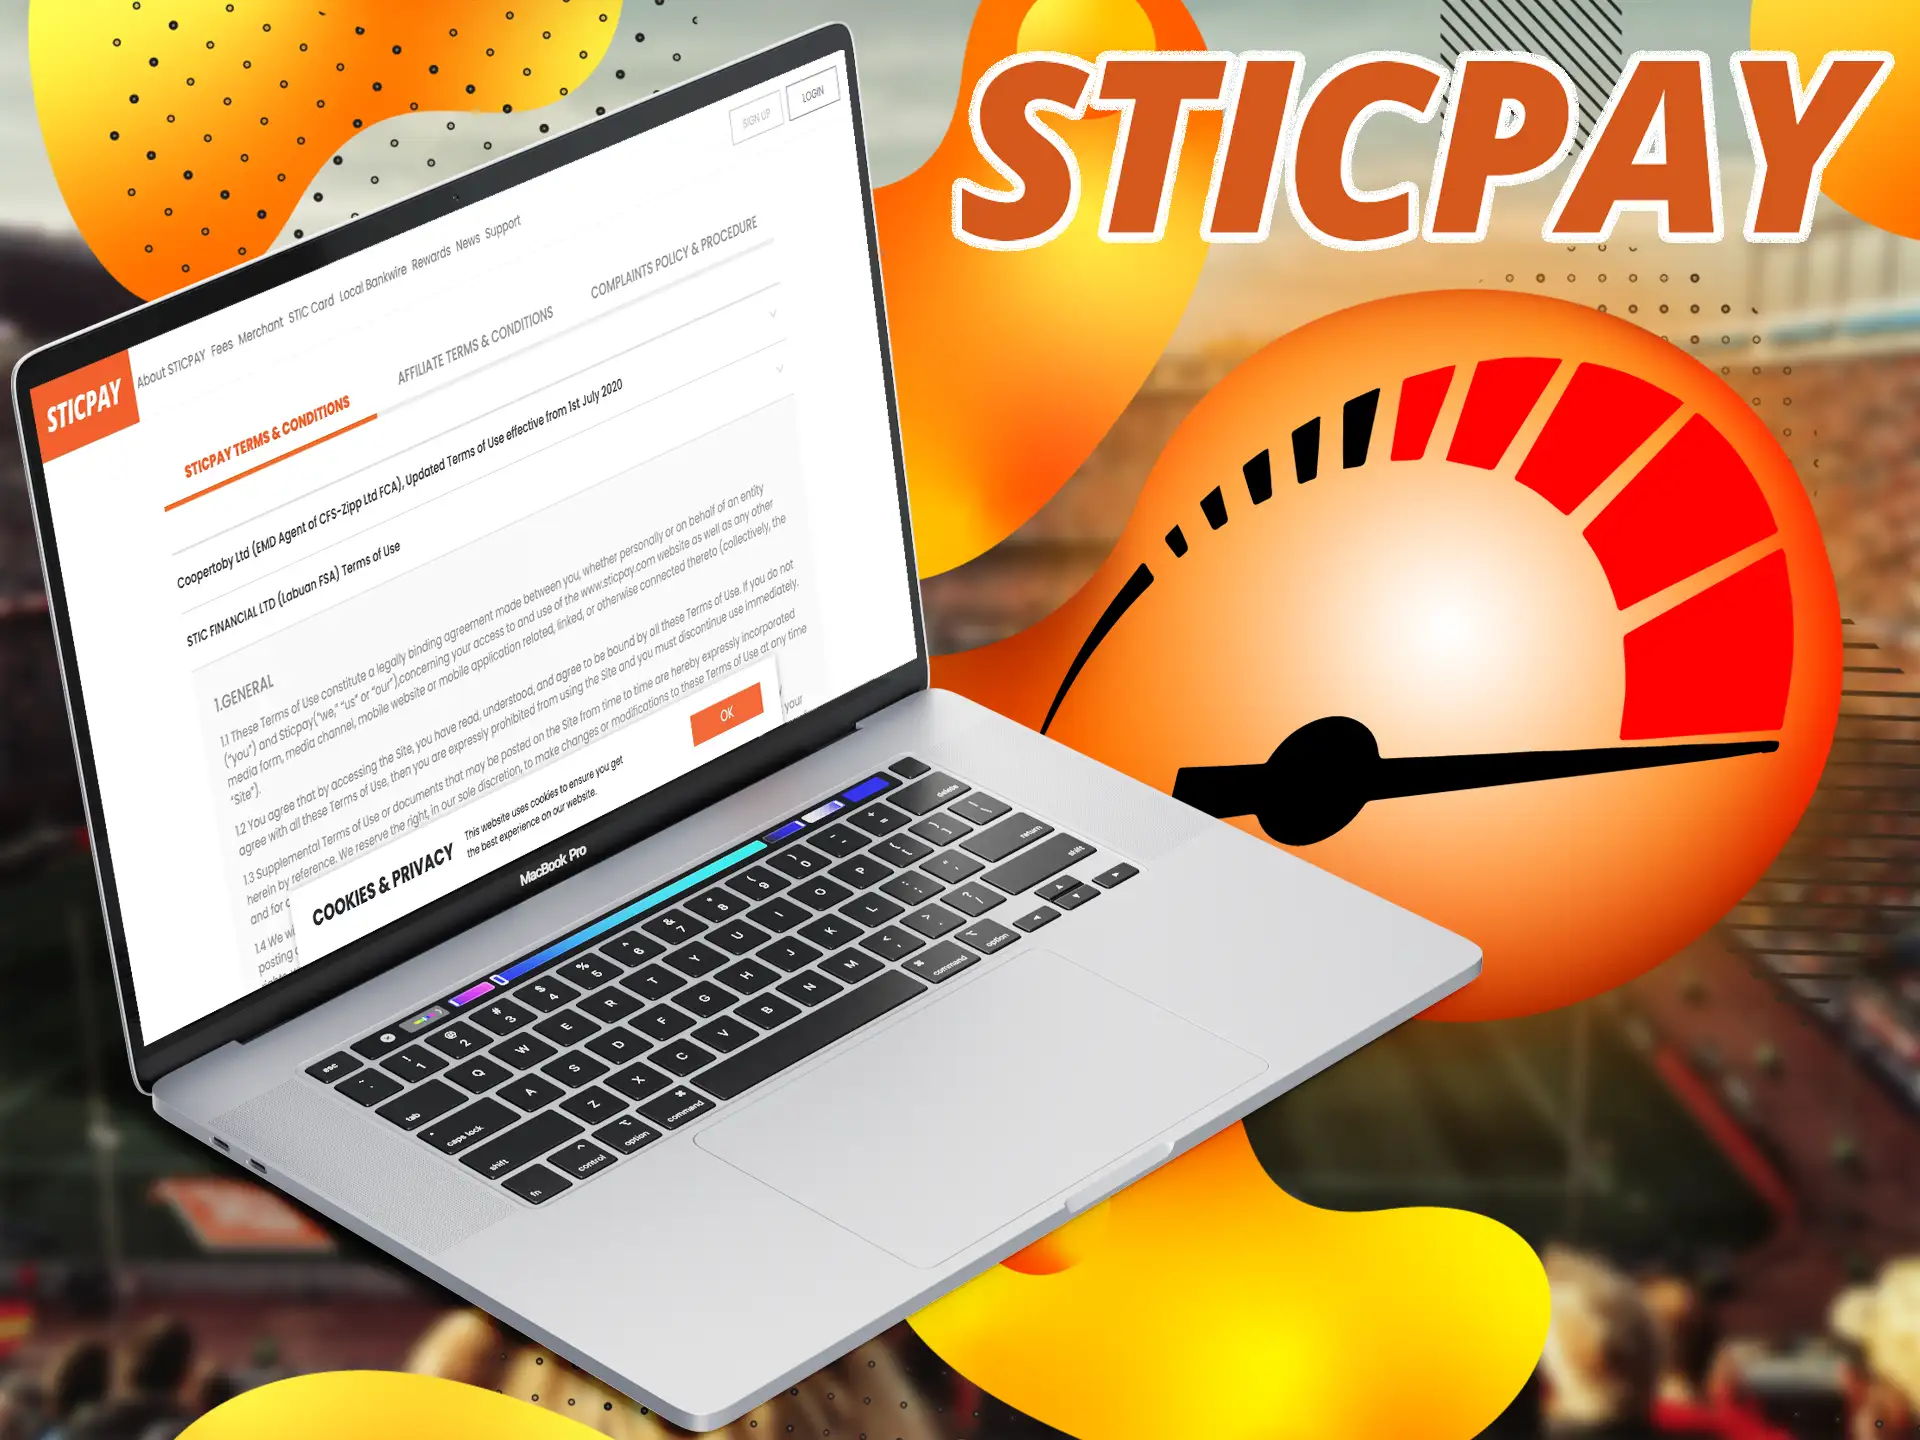 In any system there are limitations - SticPay is not an exception, here you will find limits that will not interfere with a comfortable game.